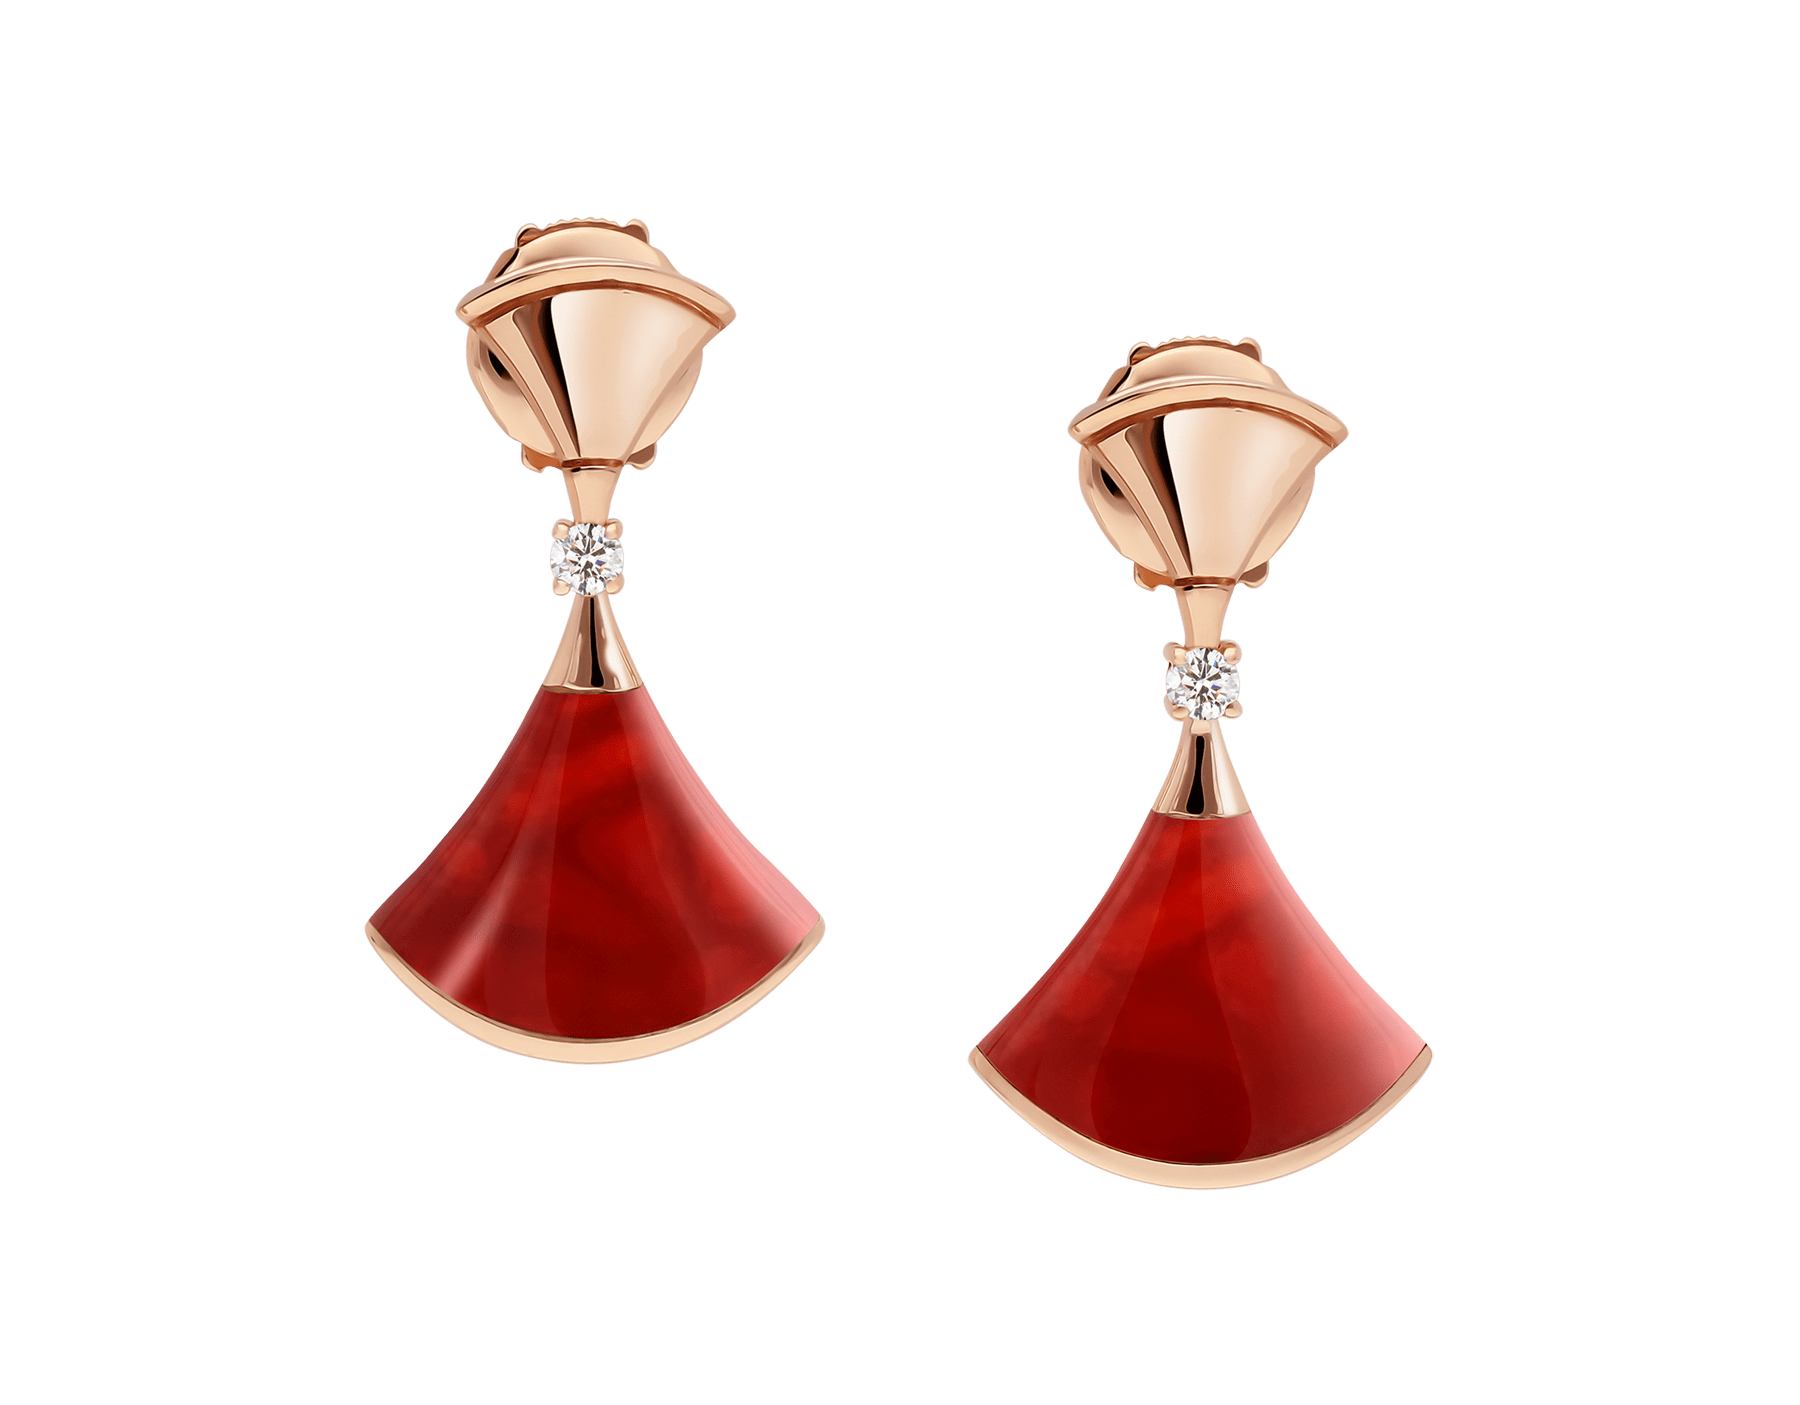 Wholesale Custom design jewelry  18 kt rose gold earrings, set with OEM/ODM Jewelry carnelian elements and round brilliant-cut diamonds